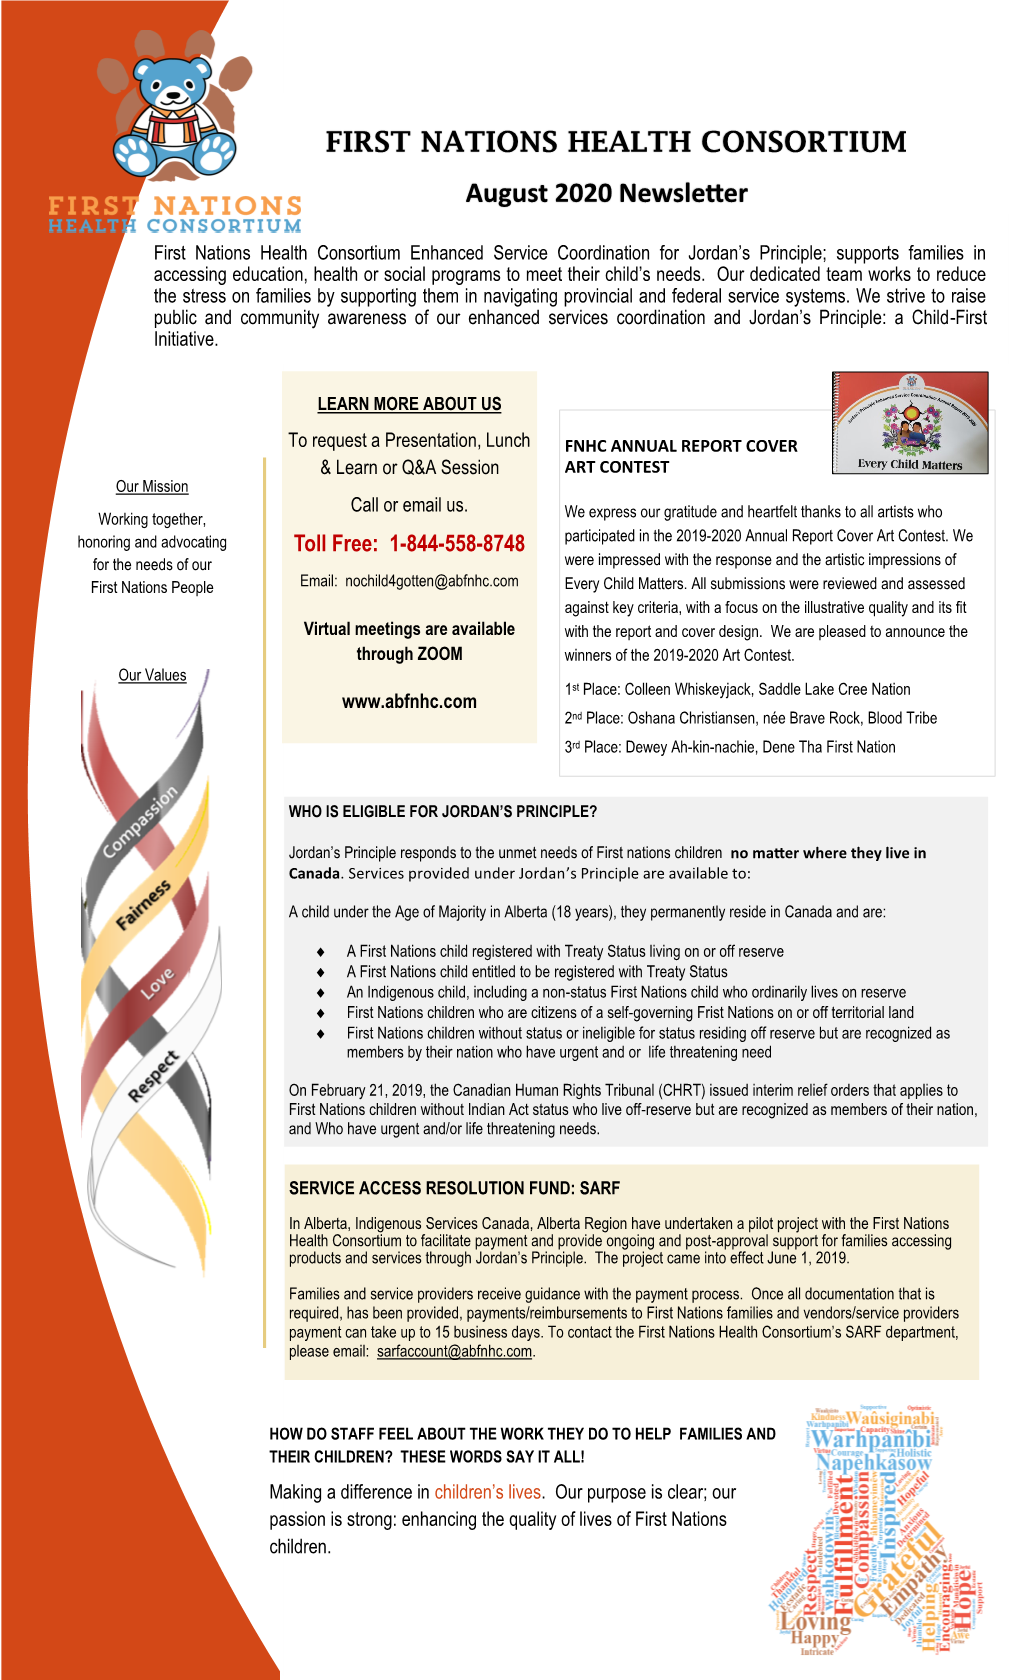 FIRST NATIONS HEALTH CONSORTIUM August 2020 Newsletter